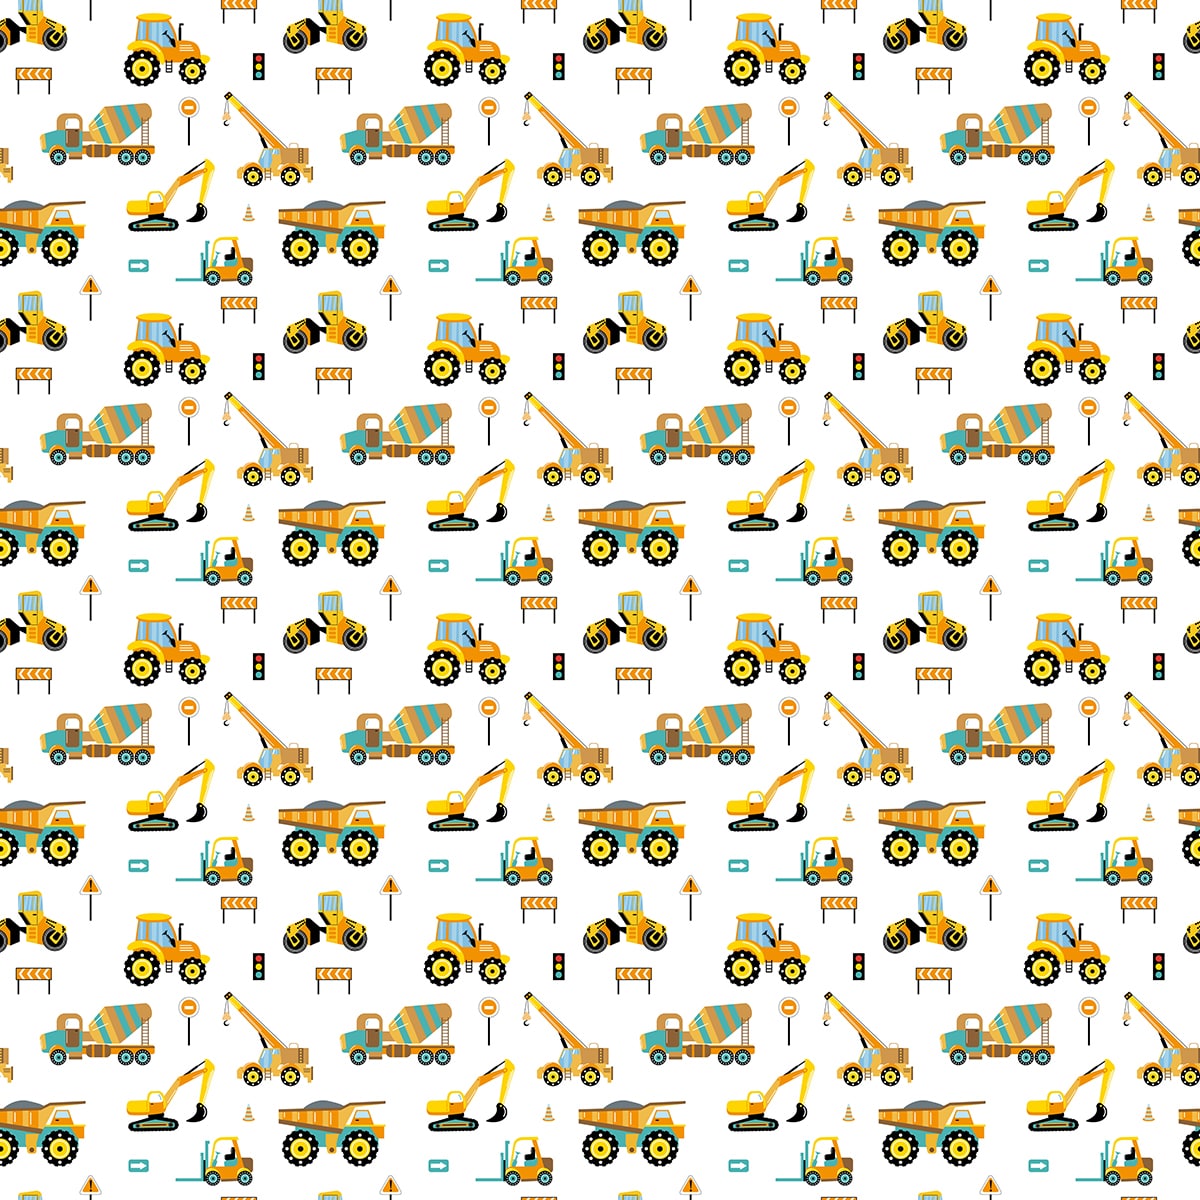 A pattern of construction vehicles